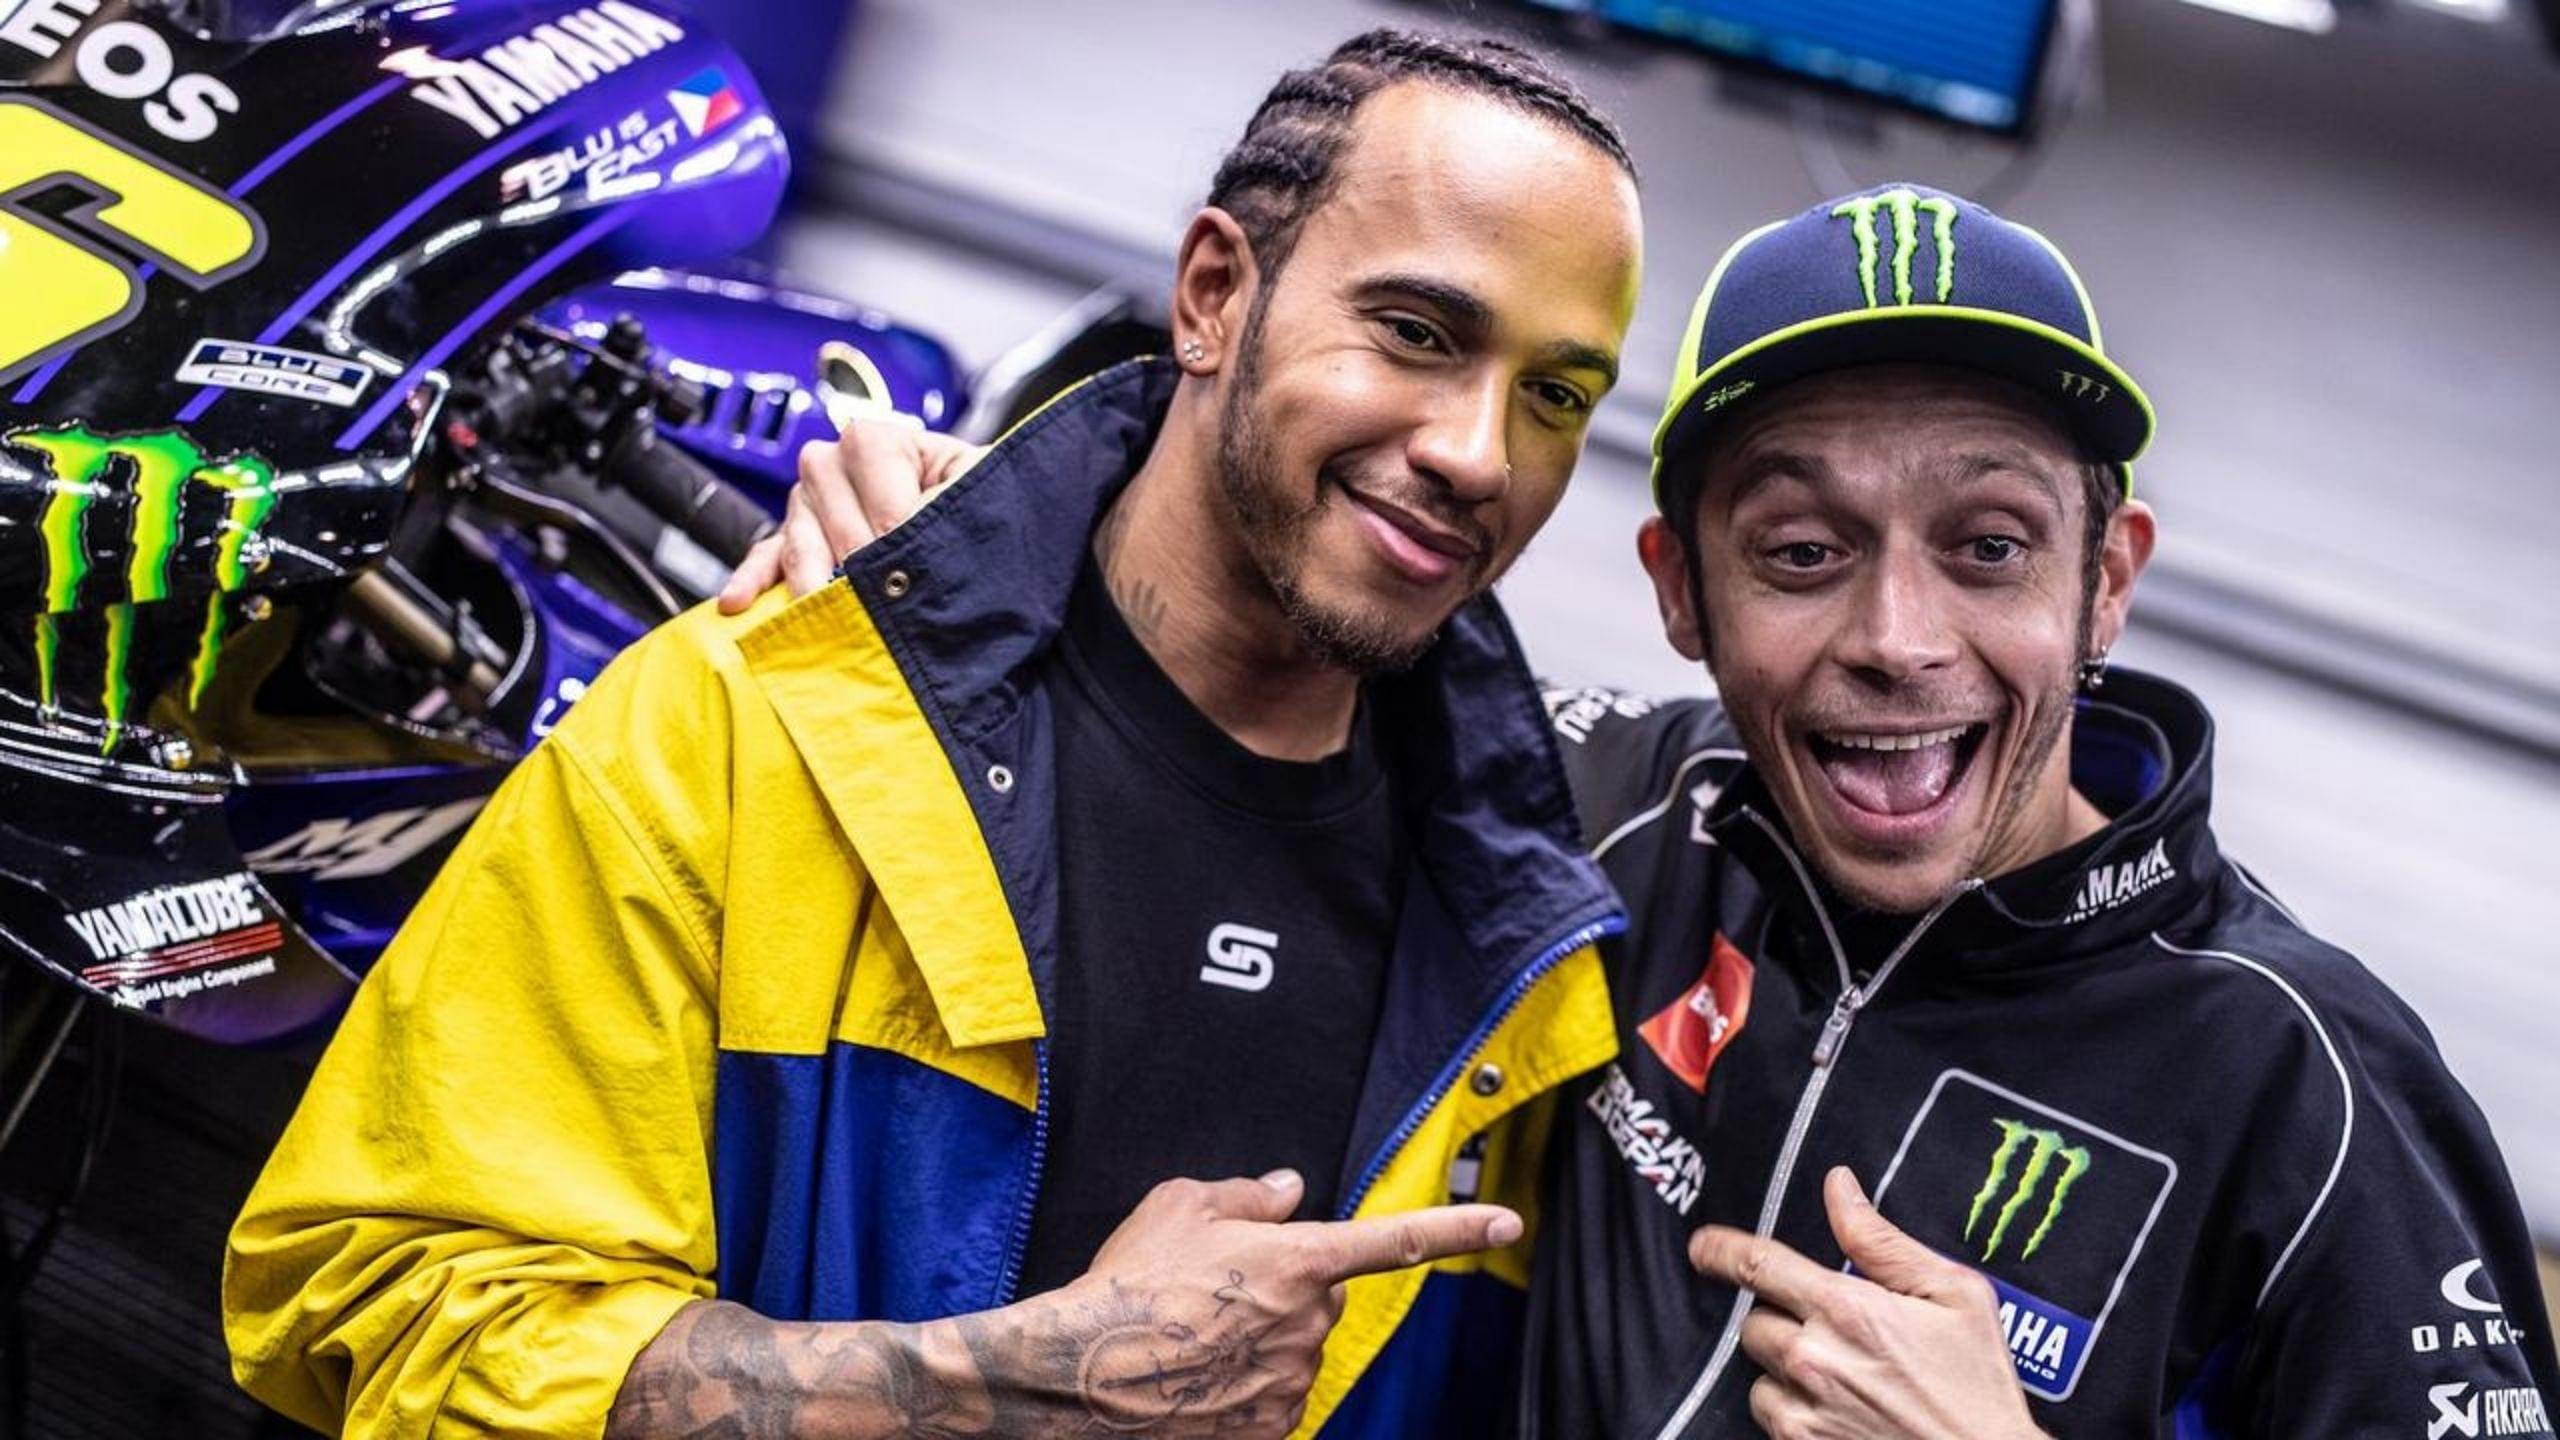 “The subject of money is always central” - MotoGP legend Valentino Rossi is happy Lewis Hamilton has re-signed for Mercedes